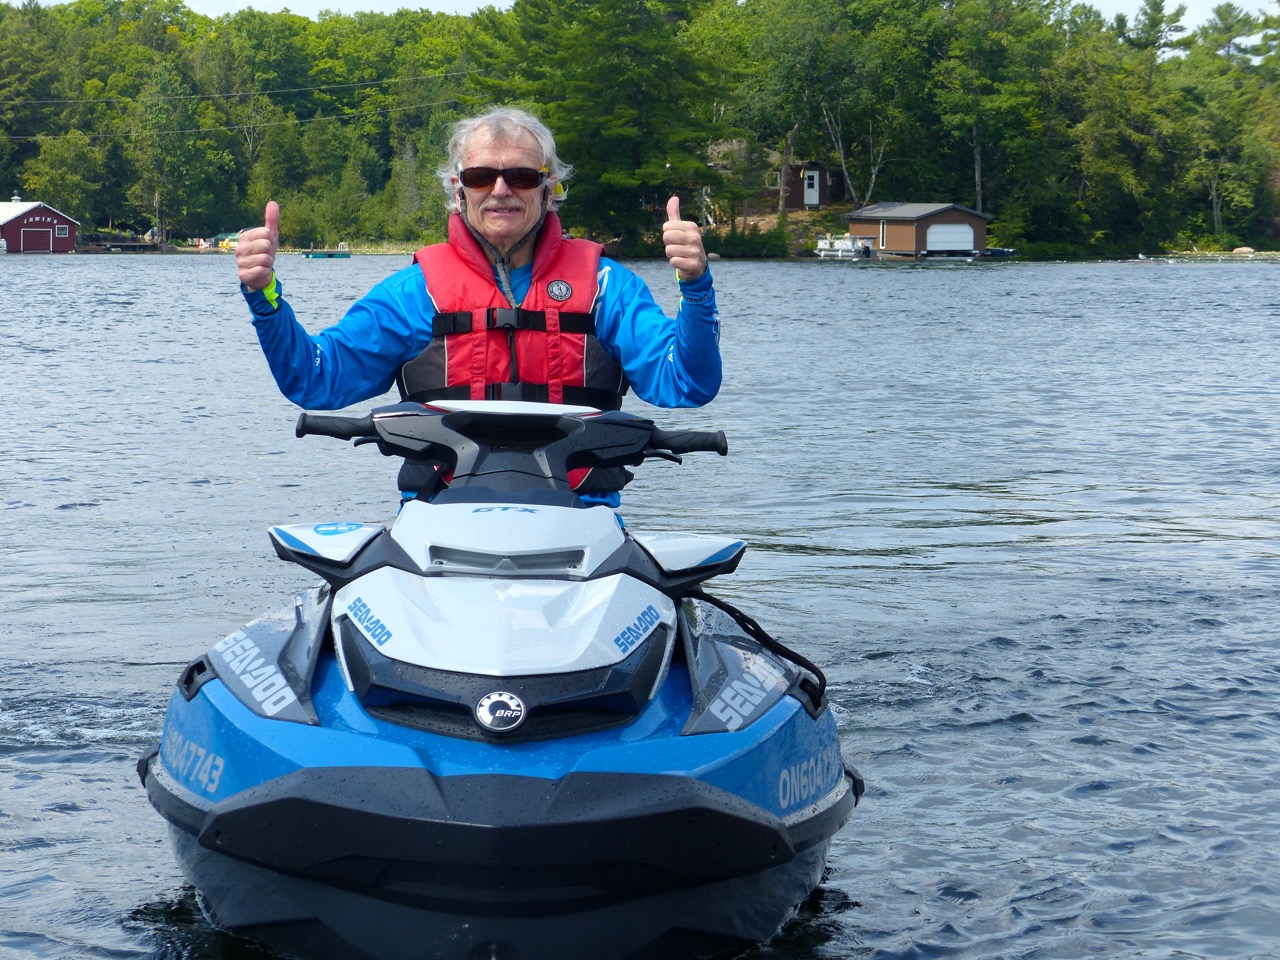 Thumbs up for the new Sea Doo platform